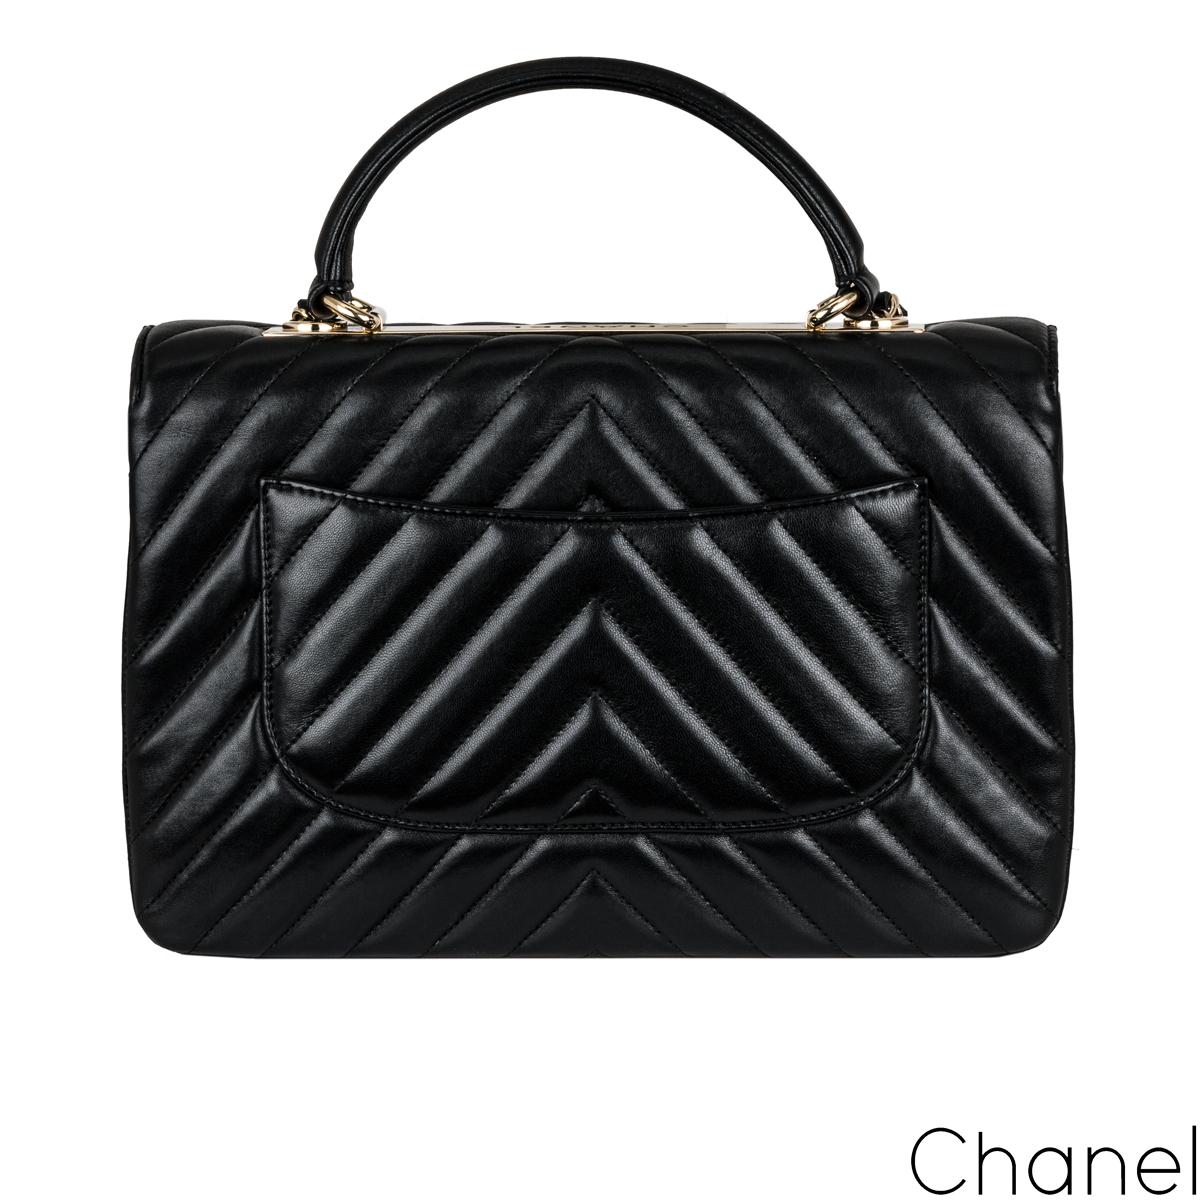 A stylish black Chanel Medium Trendy CC Flap Bag. The exterior of this Trendy is crafted with black lambskin leather in the signature chevron style stitching and gold-tone hardware. It features a front flap with signature CC turnlock closure, half